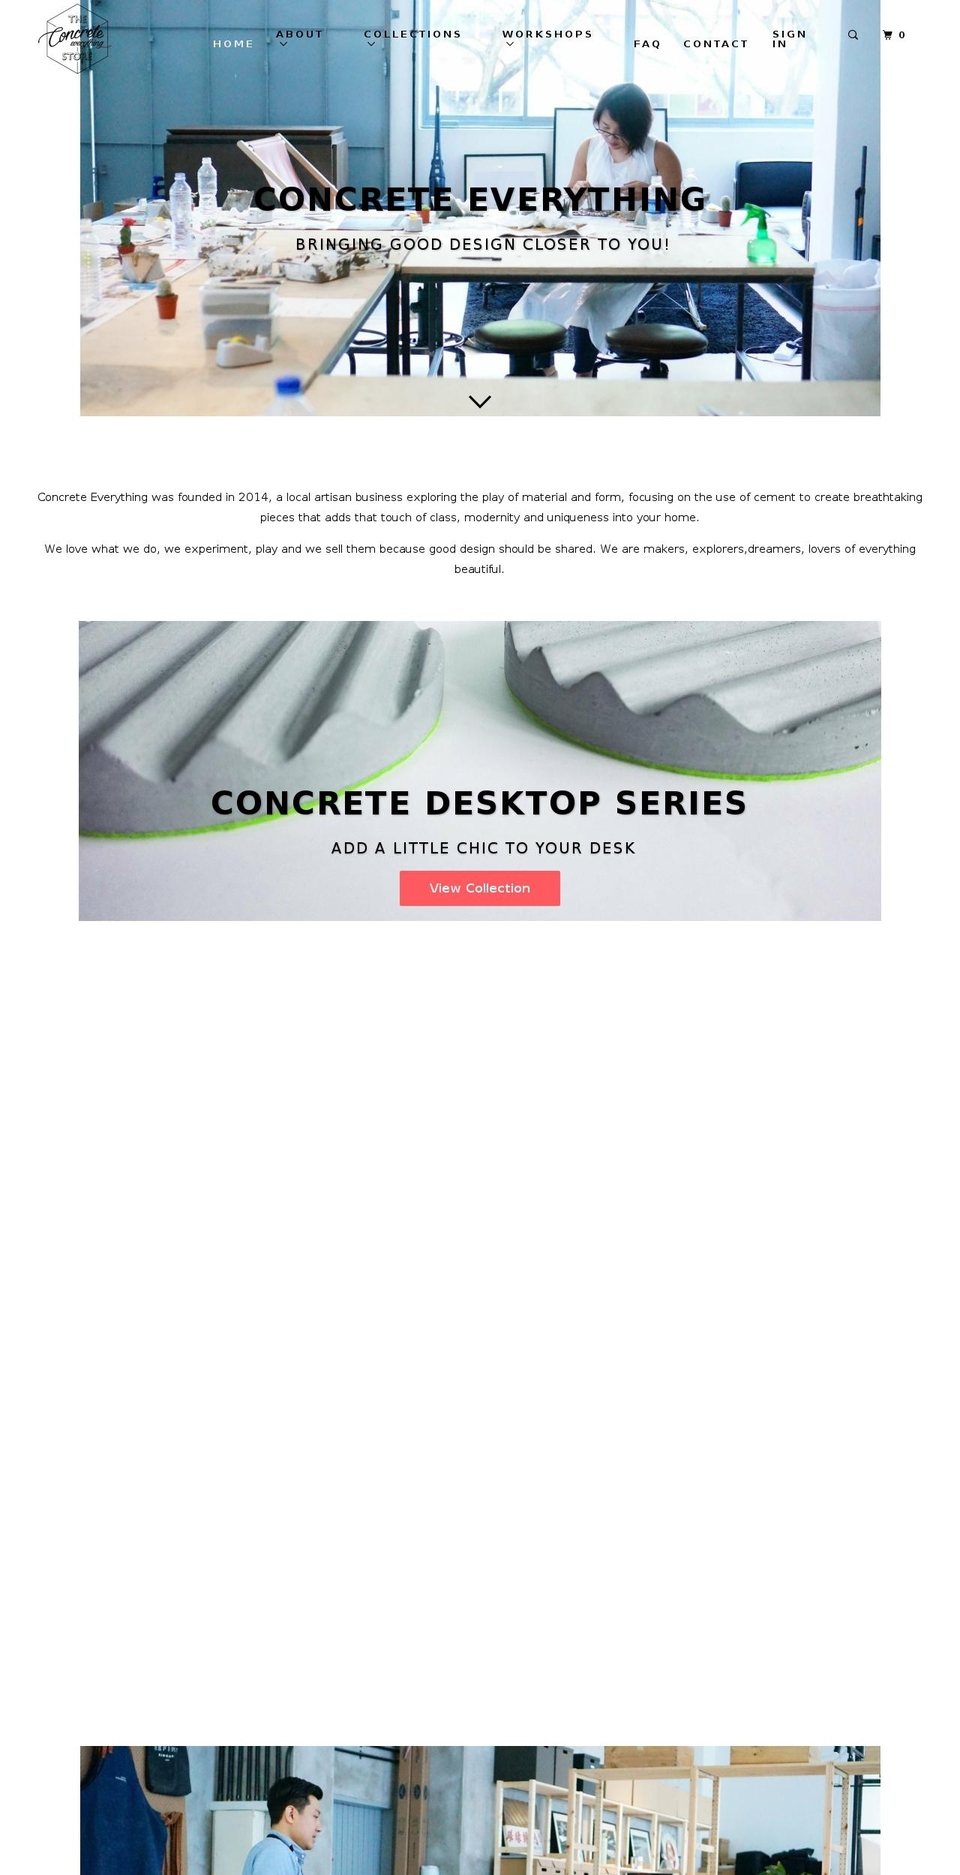 Colors Shopify theme site example concrete-everything.com